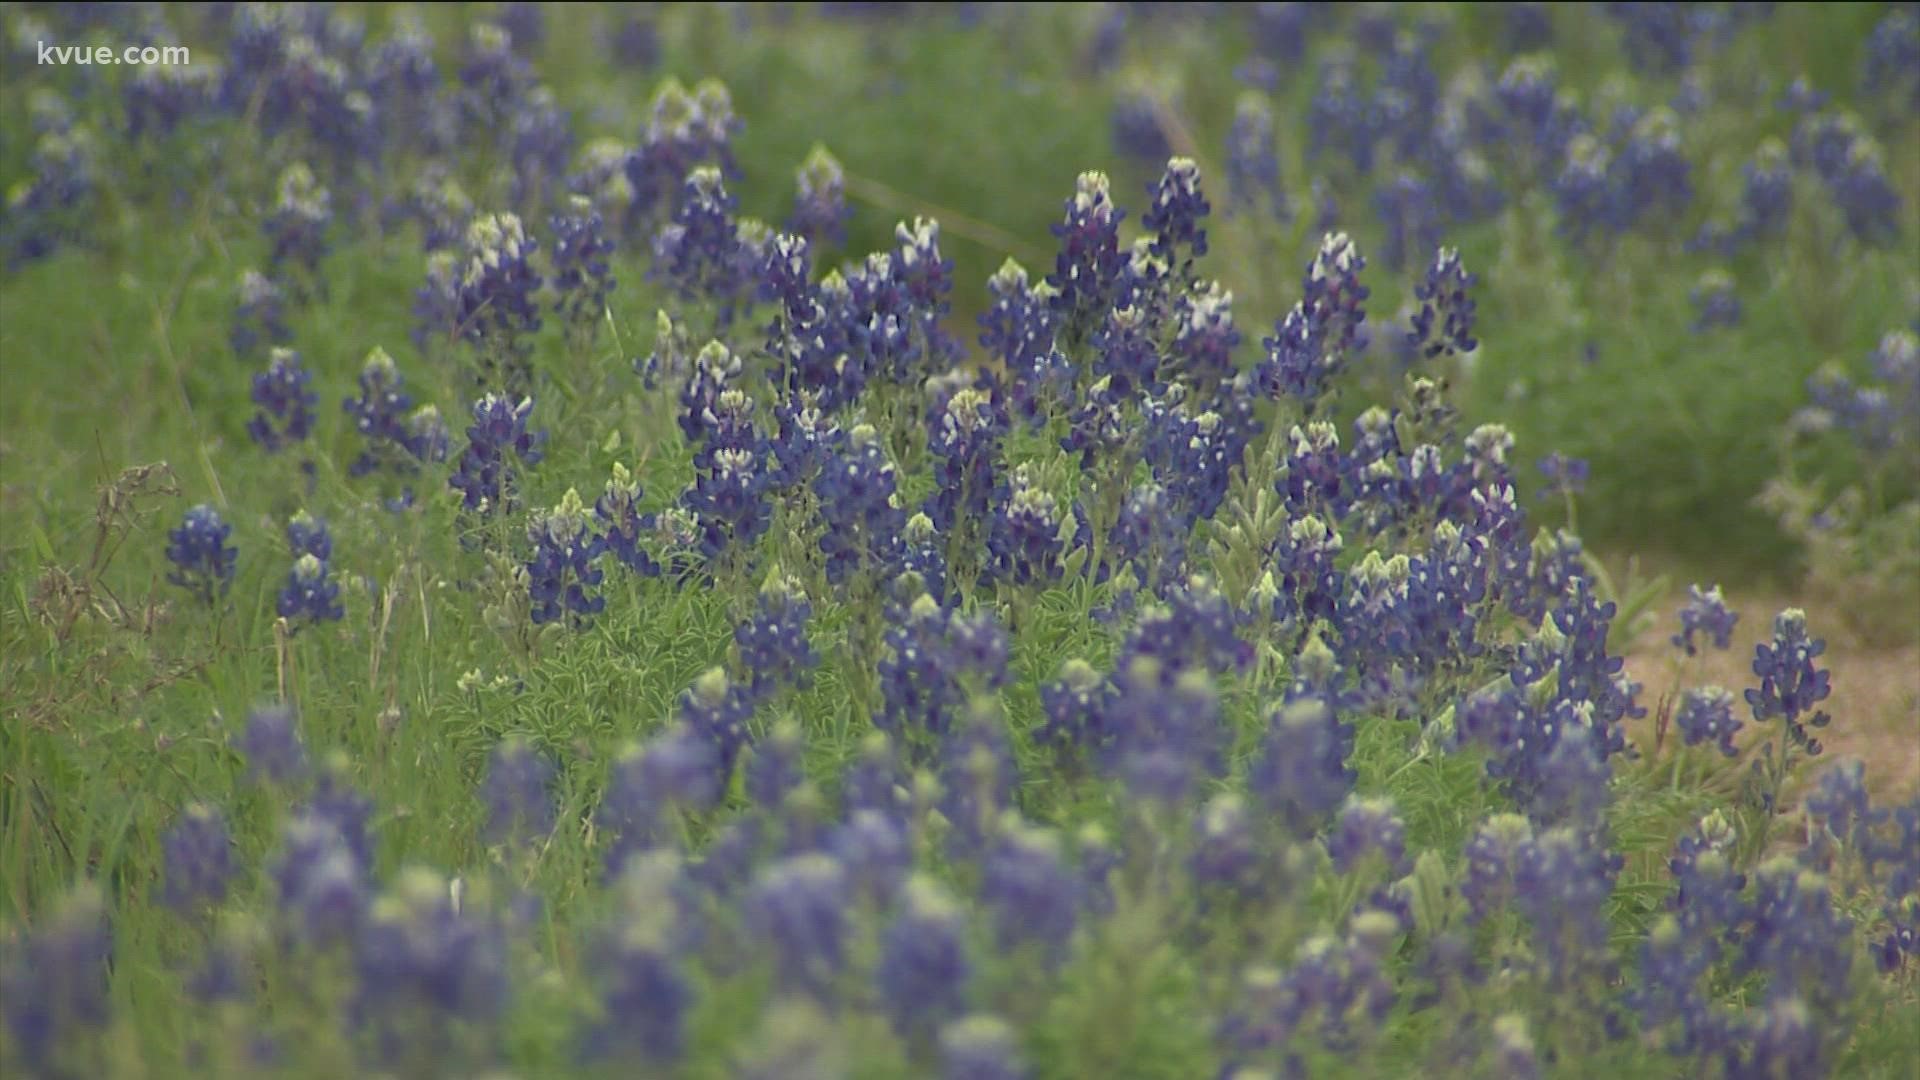 When you think about spring in Texas, it's hard not to think of the wildflowers. But what about the people who research those flowers every day?